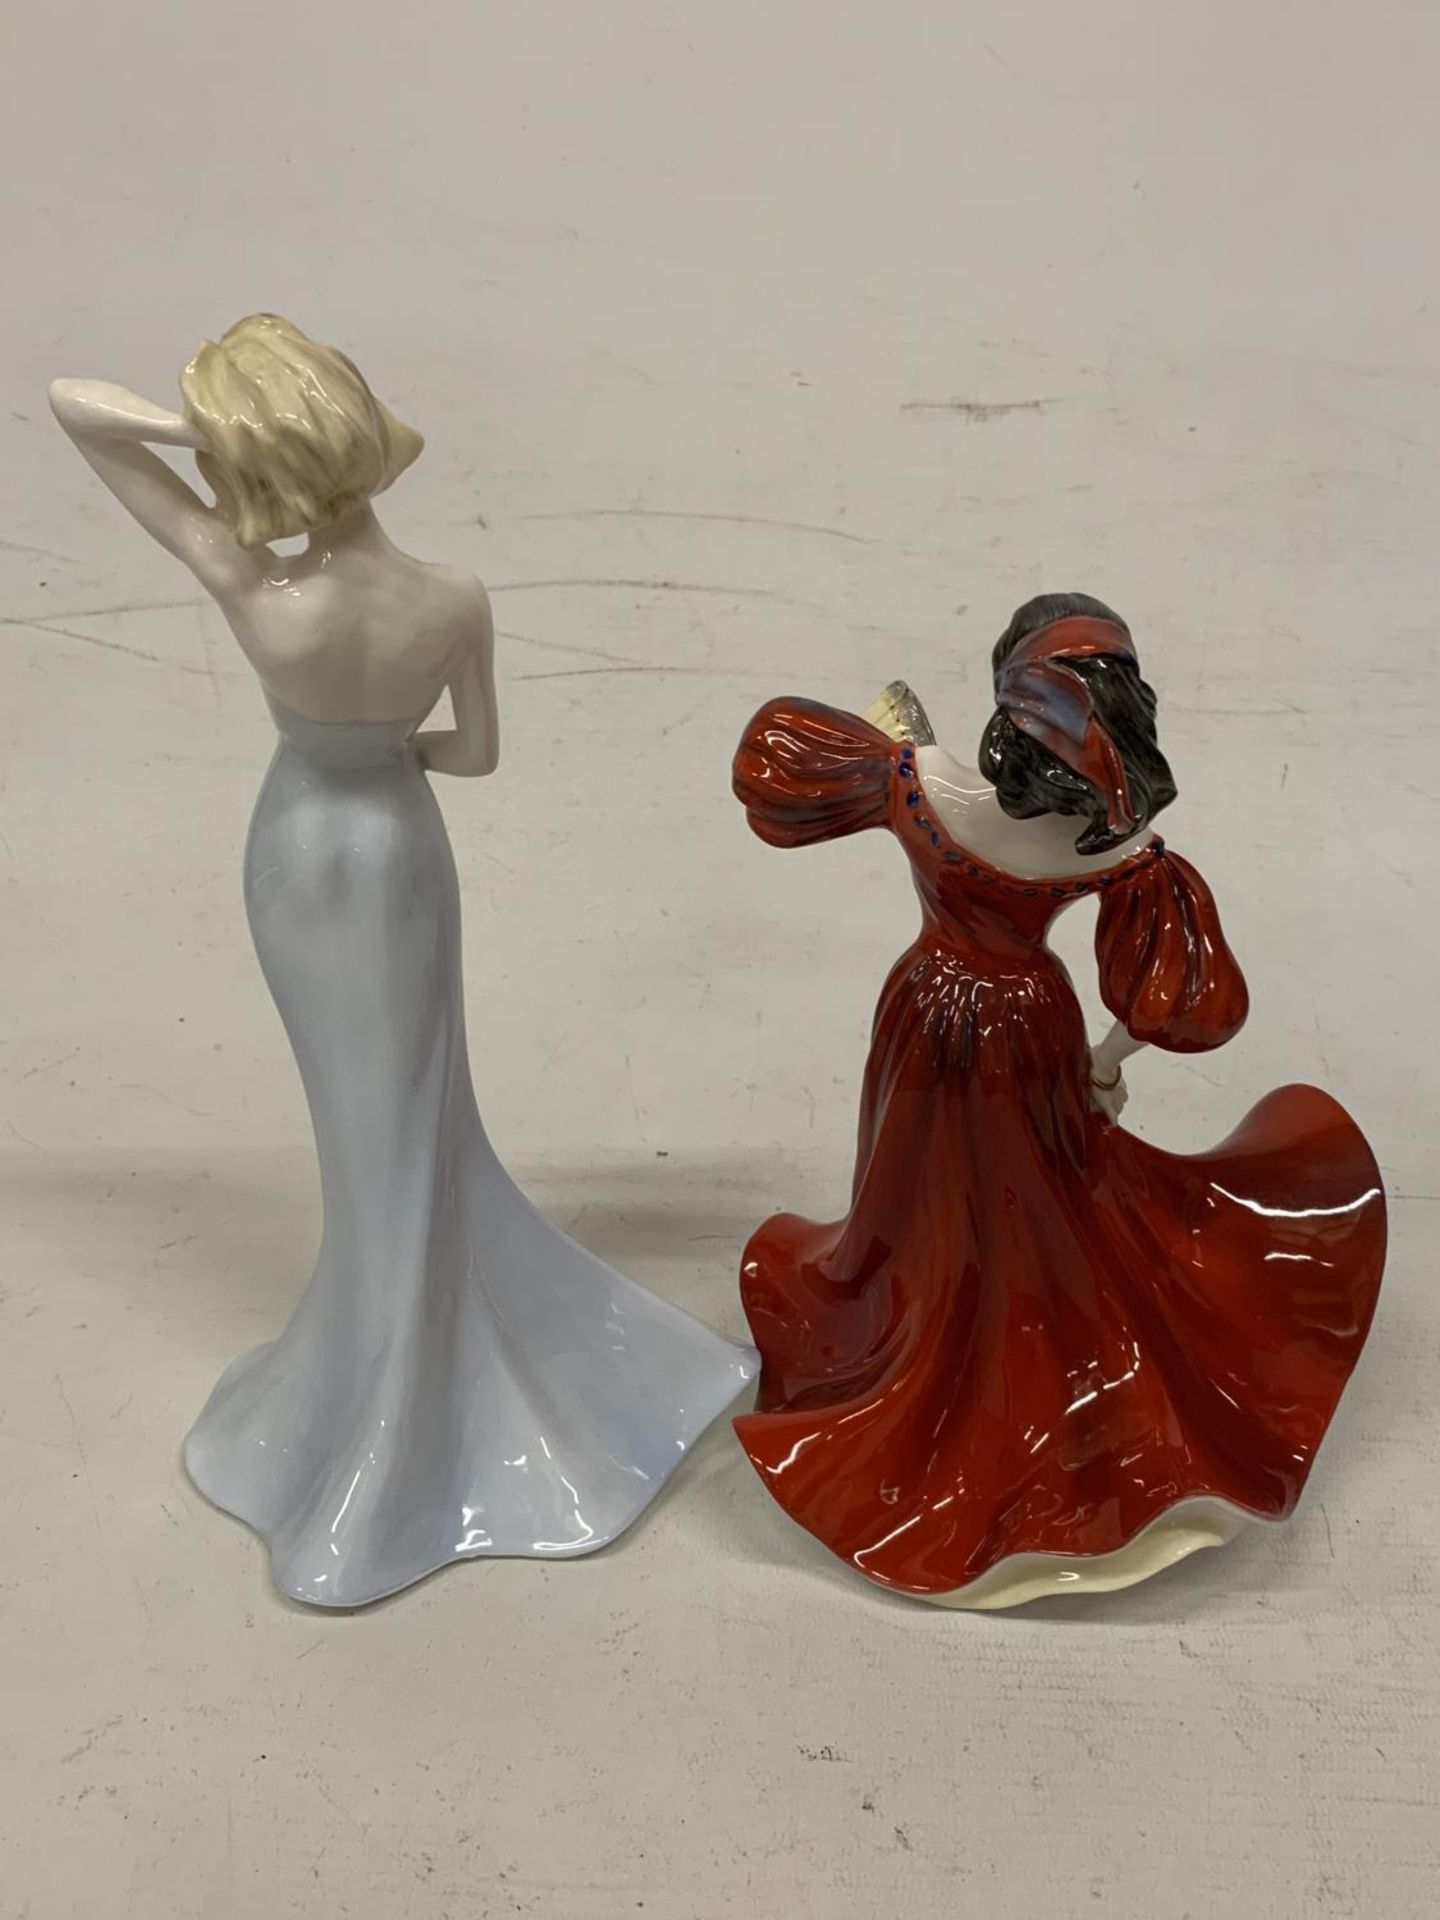 TWO COALPORT FIGURINES - SILHOUETTES "GILLIAN" AND LADIES OF FASHION "ROMANY DANCE" - Image 3 of 4